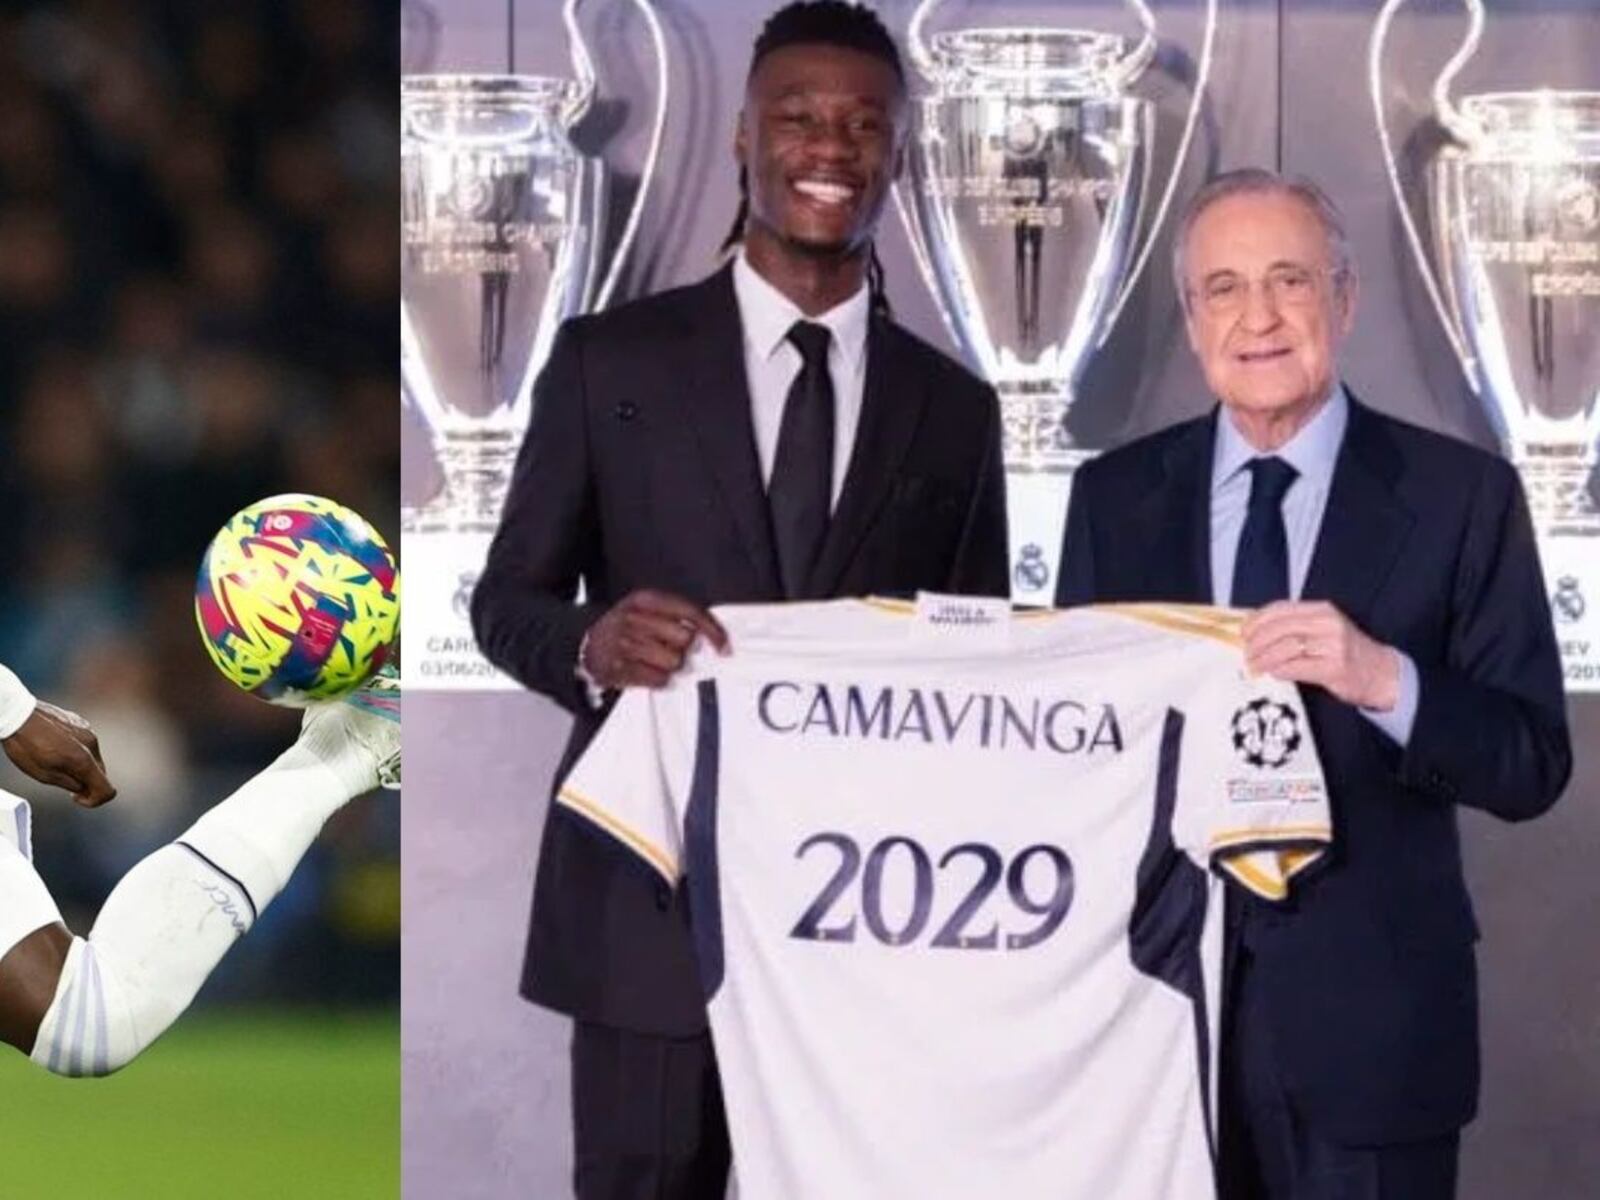 Not only football, the business that Camavinga closed before renewing with Real Madrid